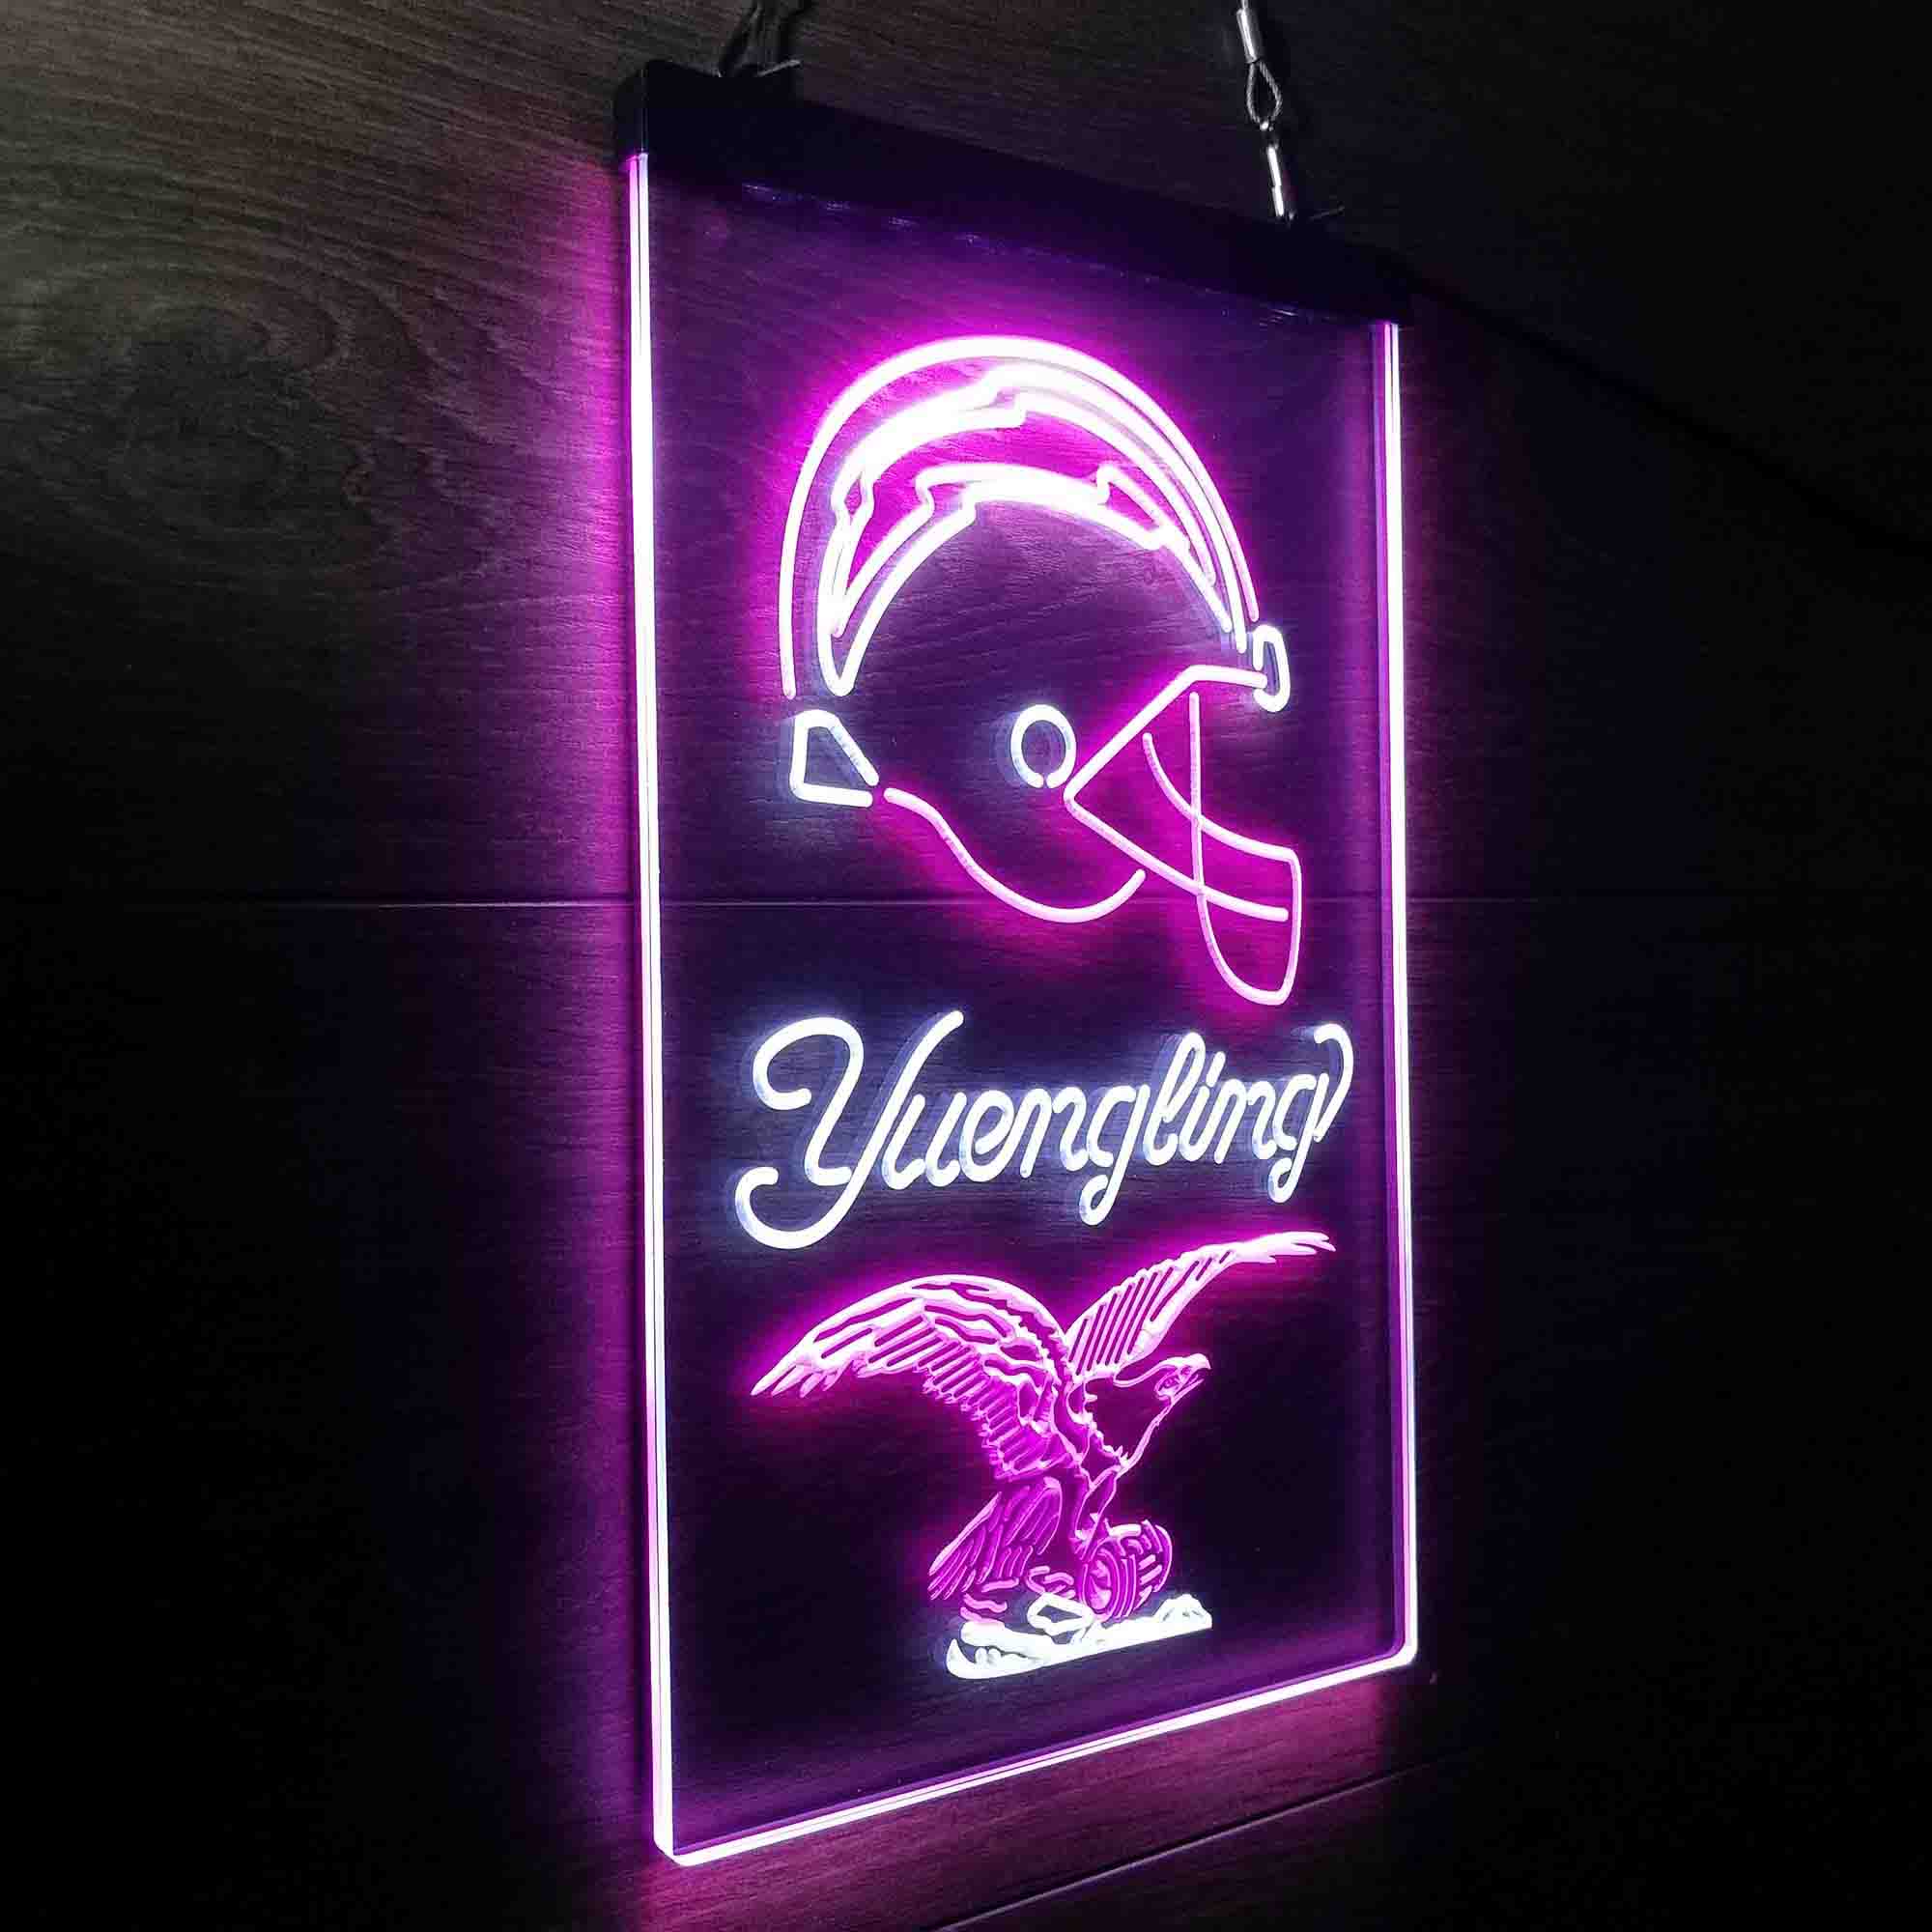 Yuengling Bar Los Angeles Chargers Est. 1960 Neon-Like LED Sign